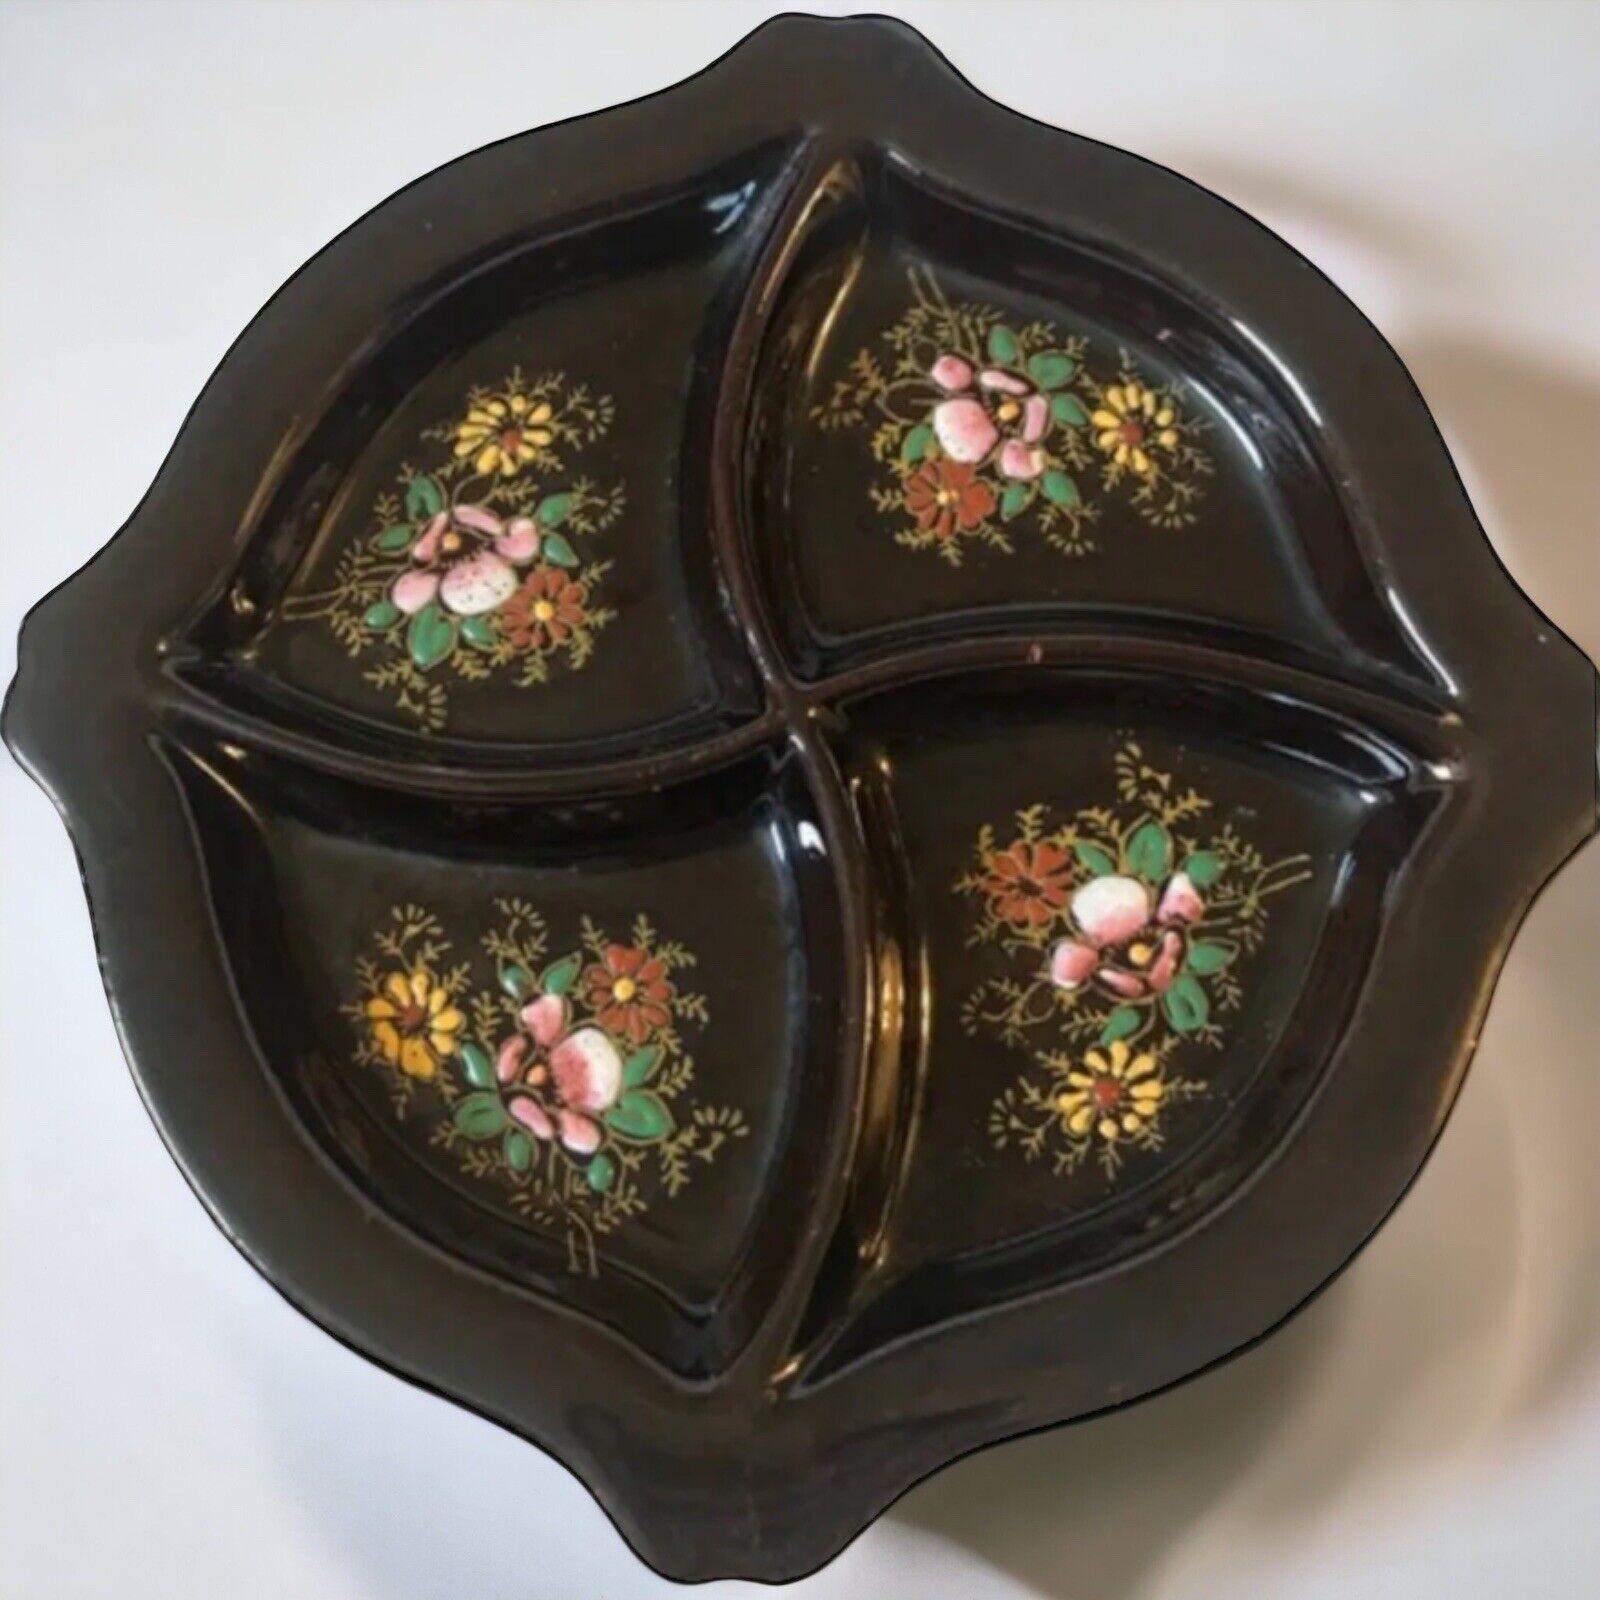 Made in Japan Brown Floral Divided Ceramic Small Trinket Dish Unique Unusual